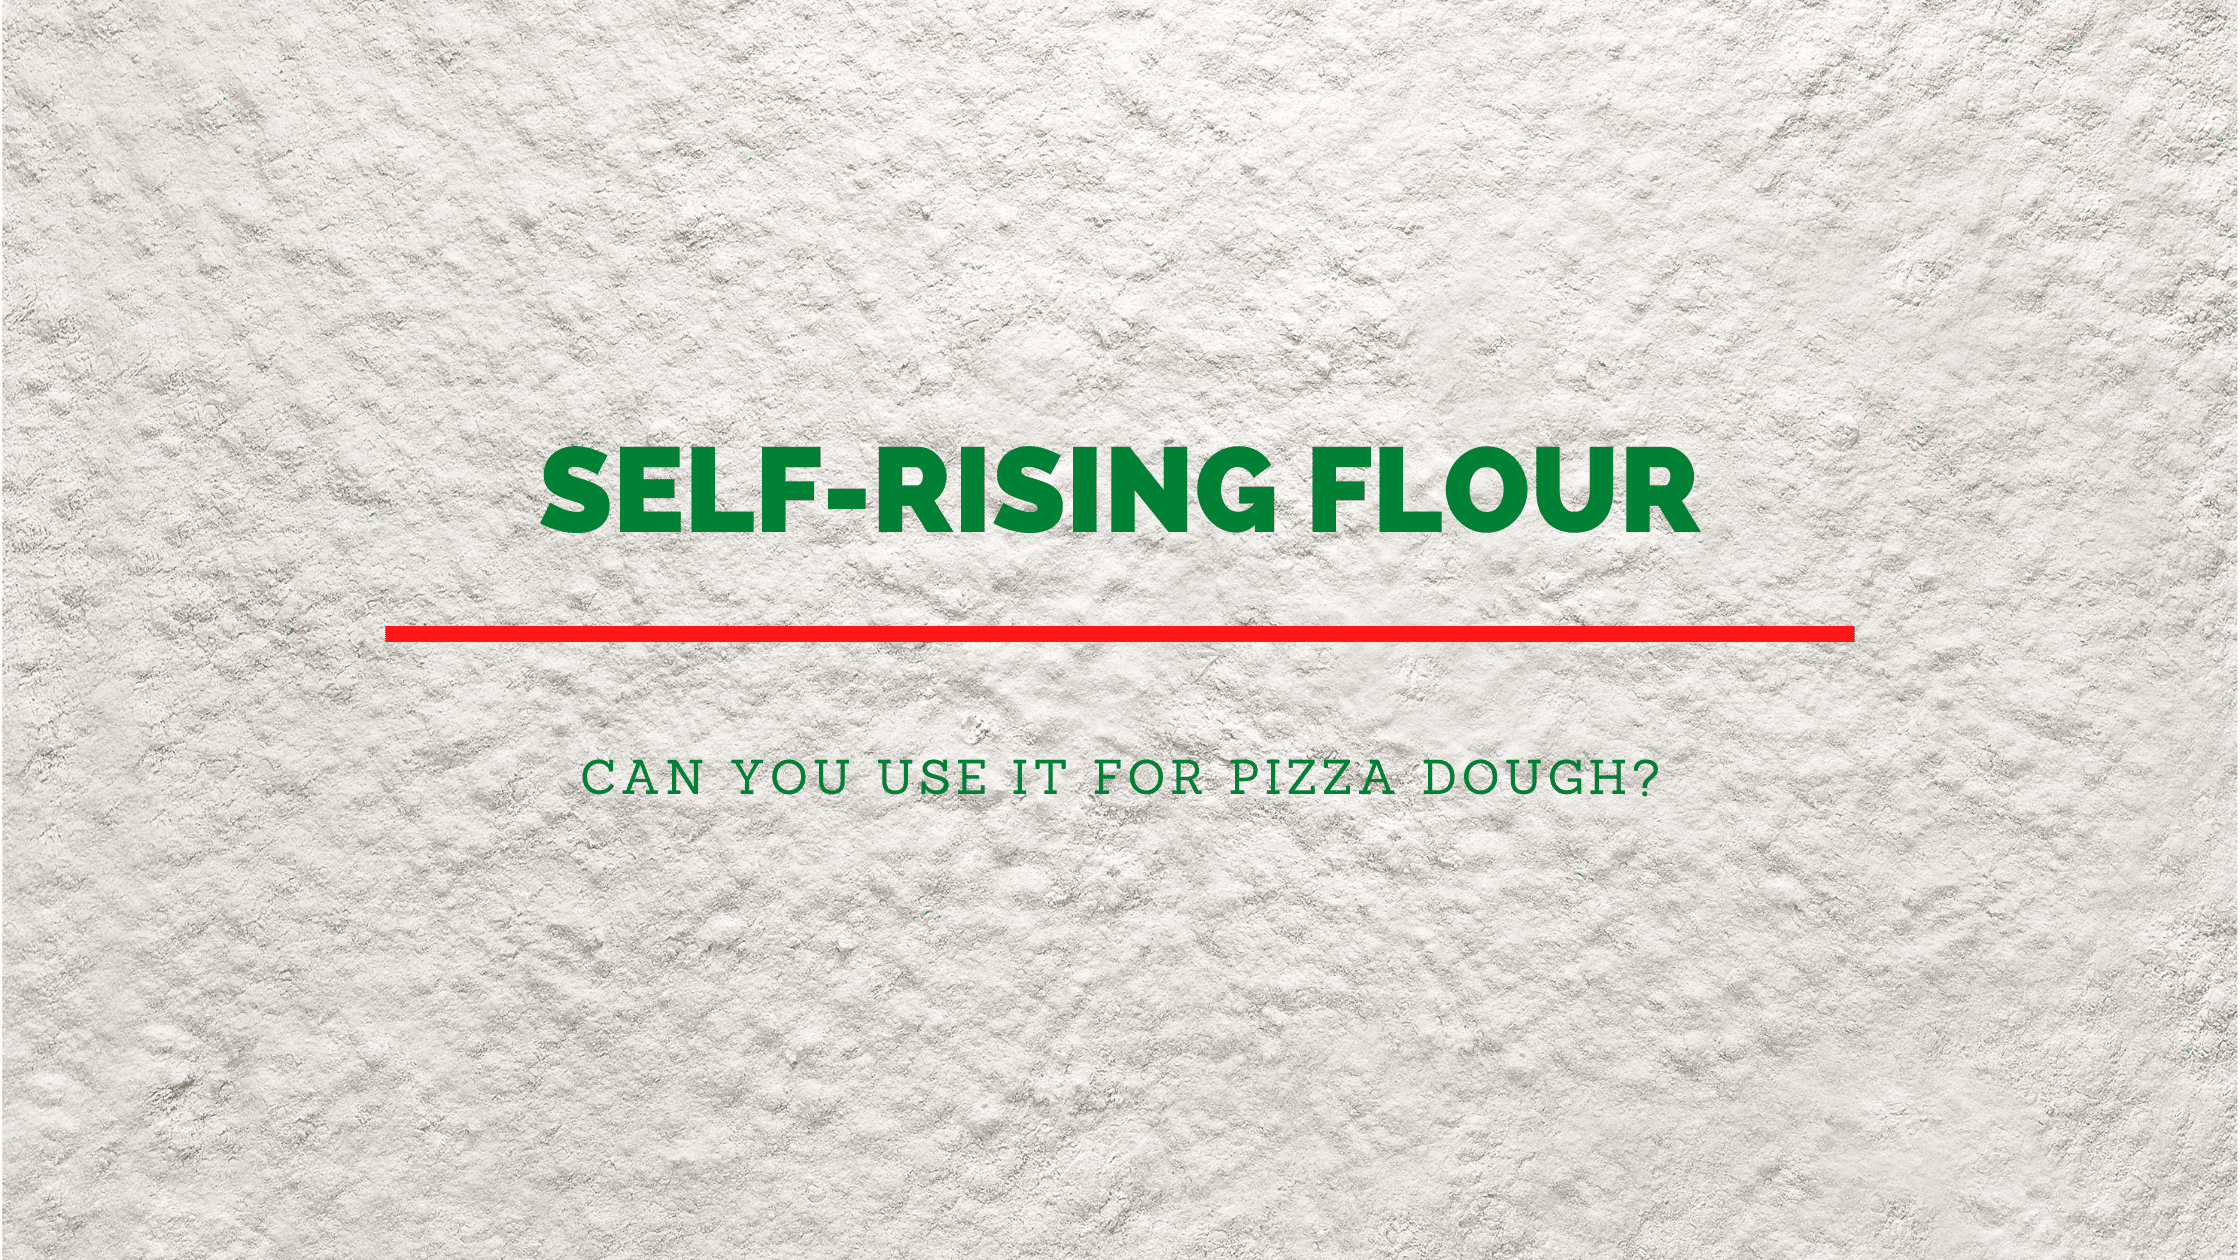 Can You use self-rising flour for pizza dough